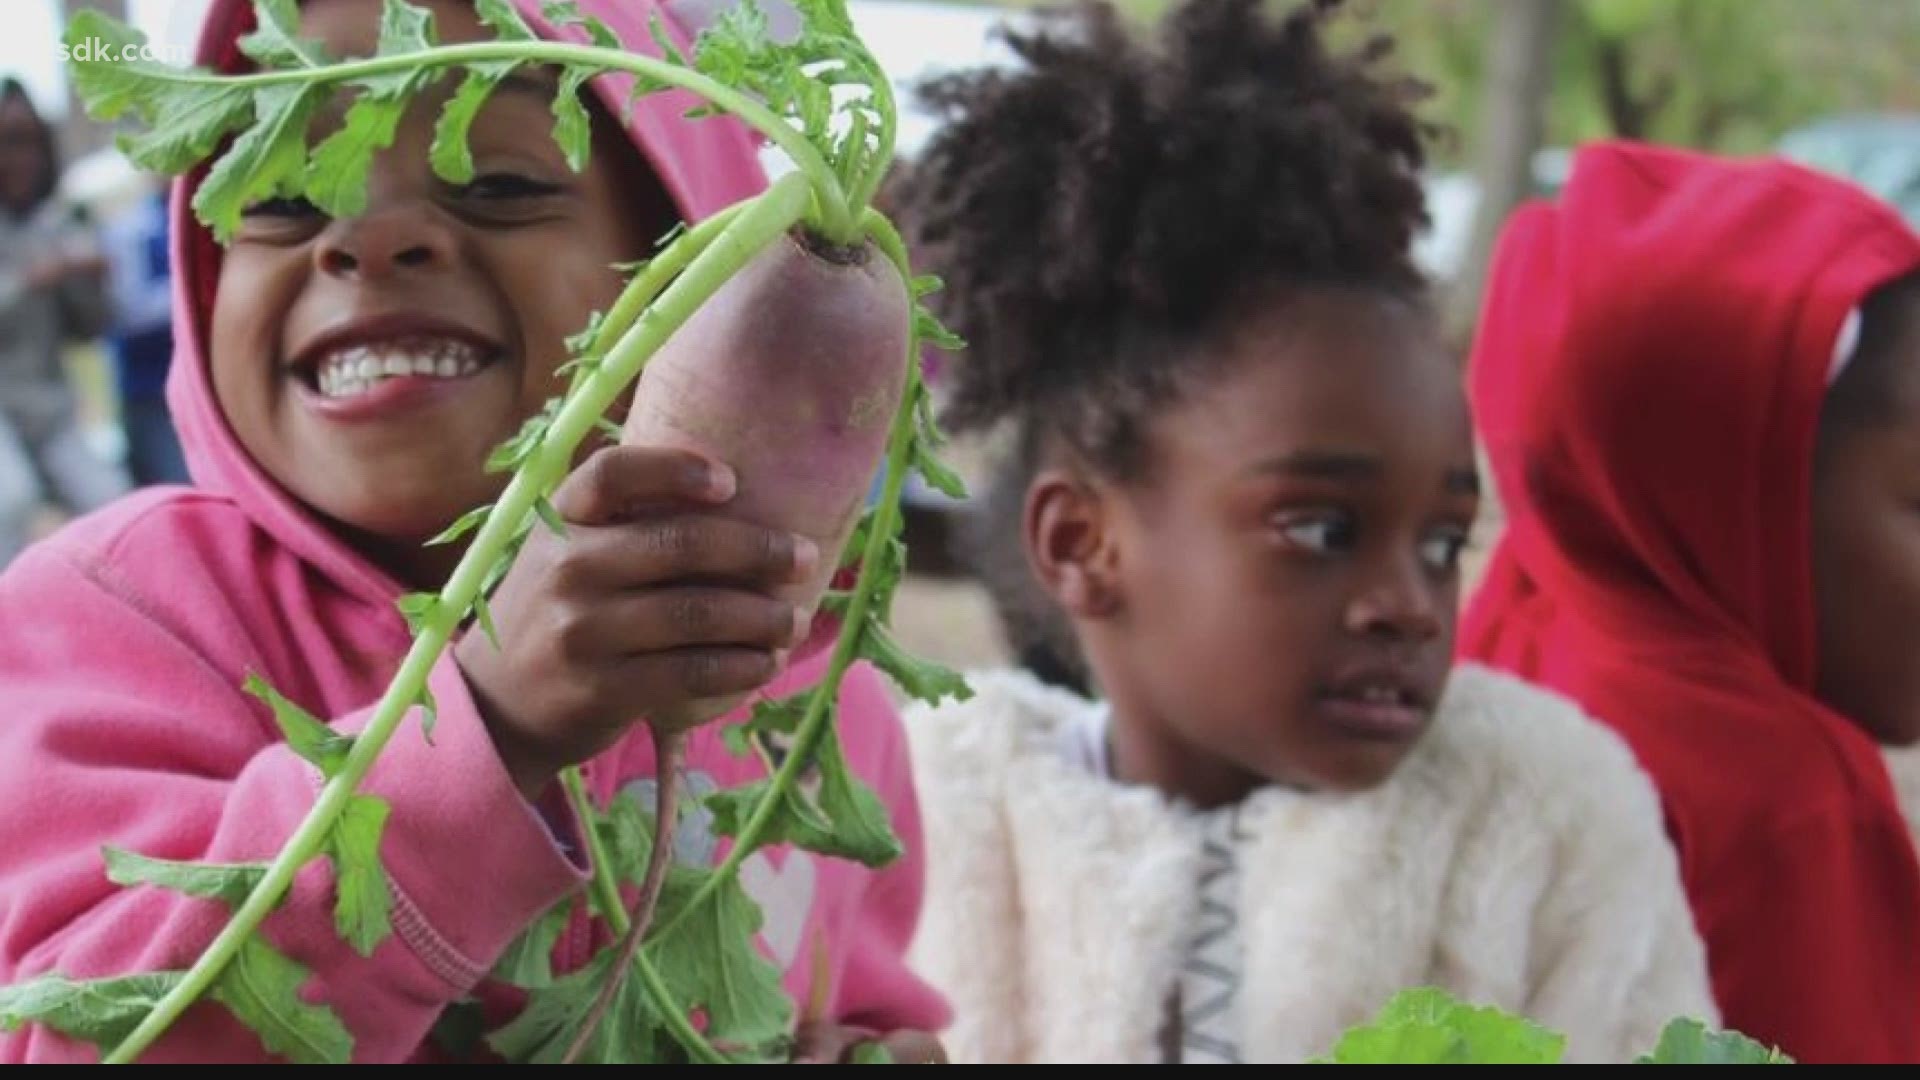 EarthDance wants to help share organic food knowledge and resources with their community.